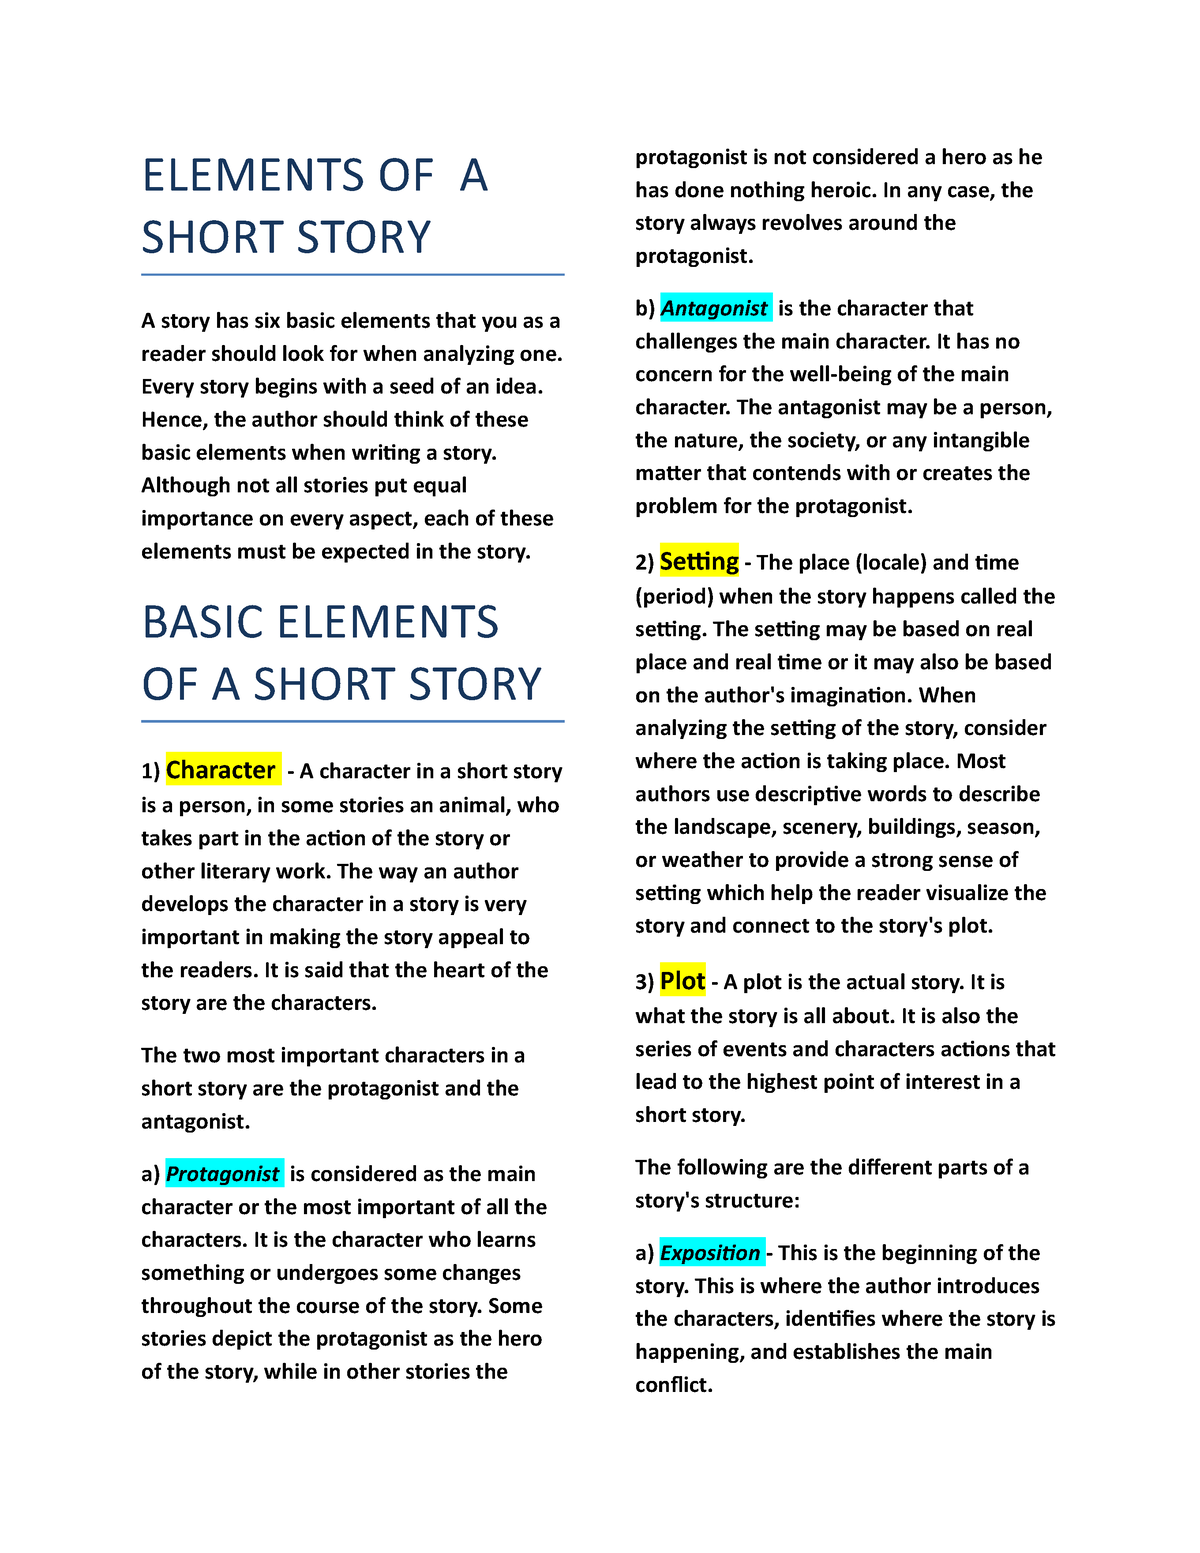 Elements Of AShort Story - ELEMENTS OF A SHORT STORY A story has six ...